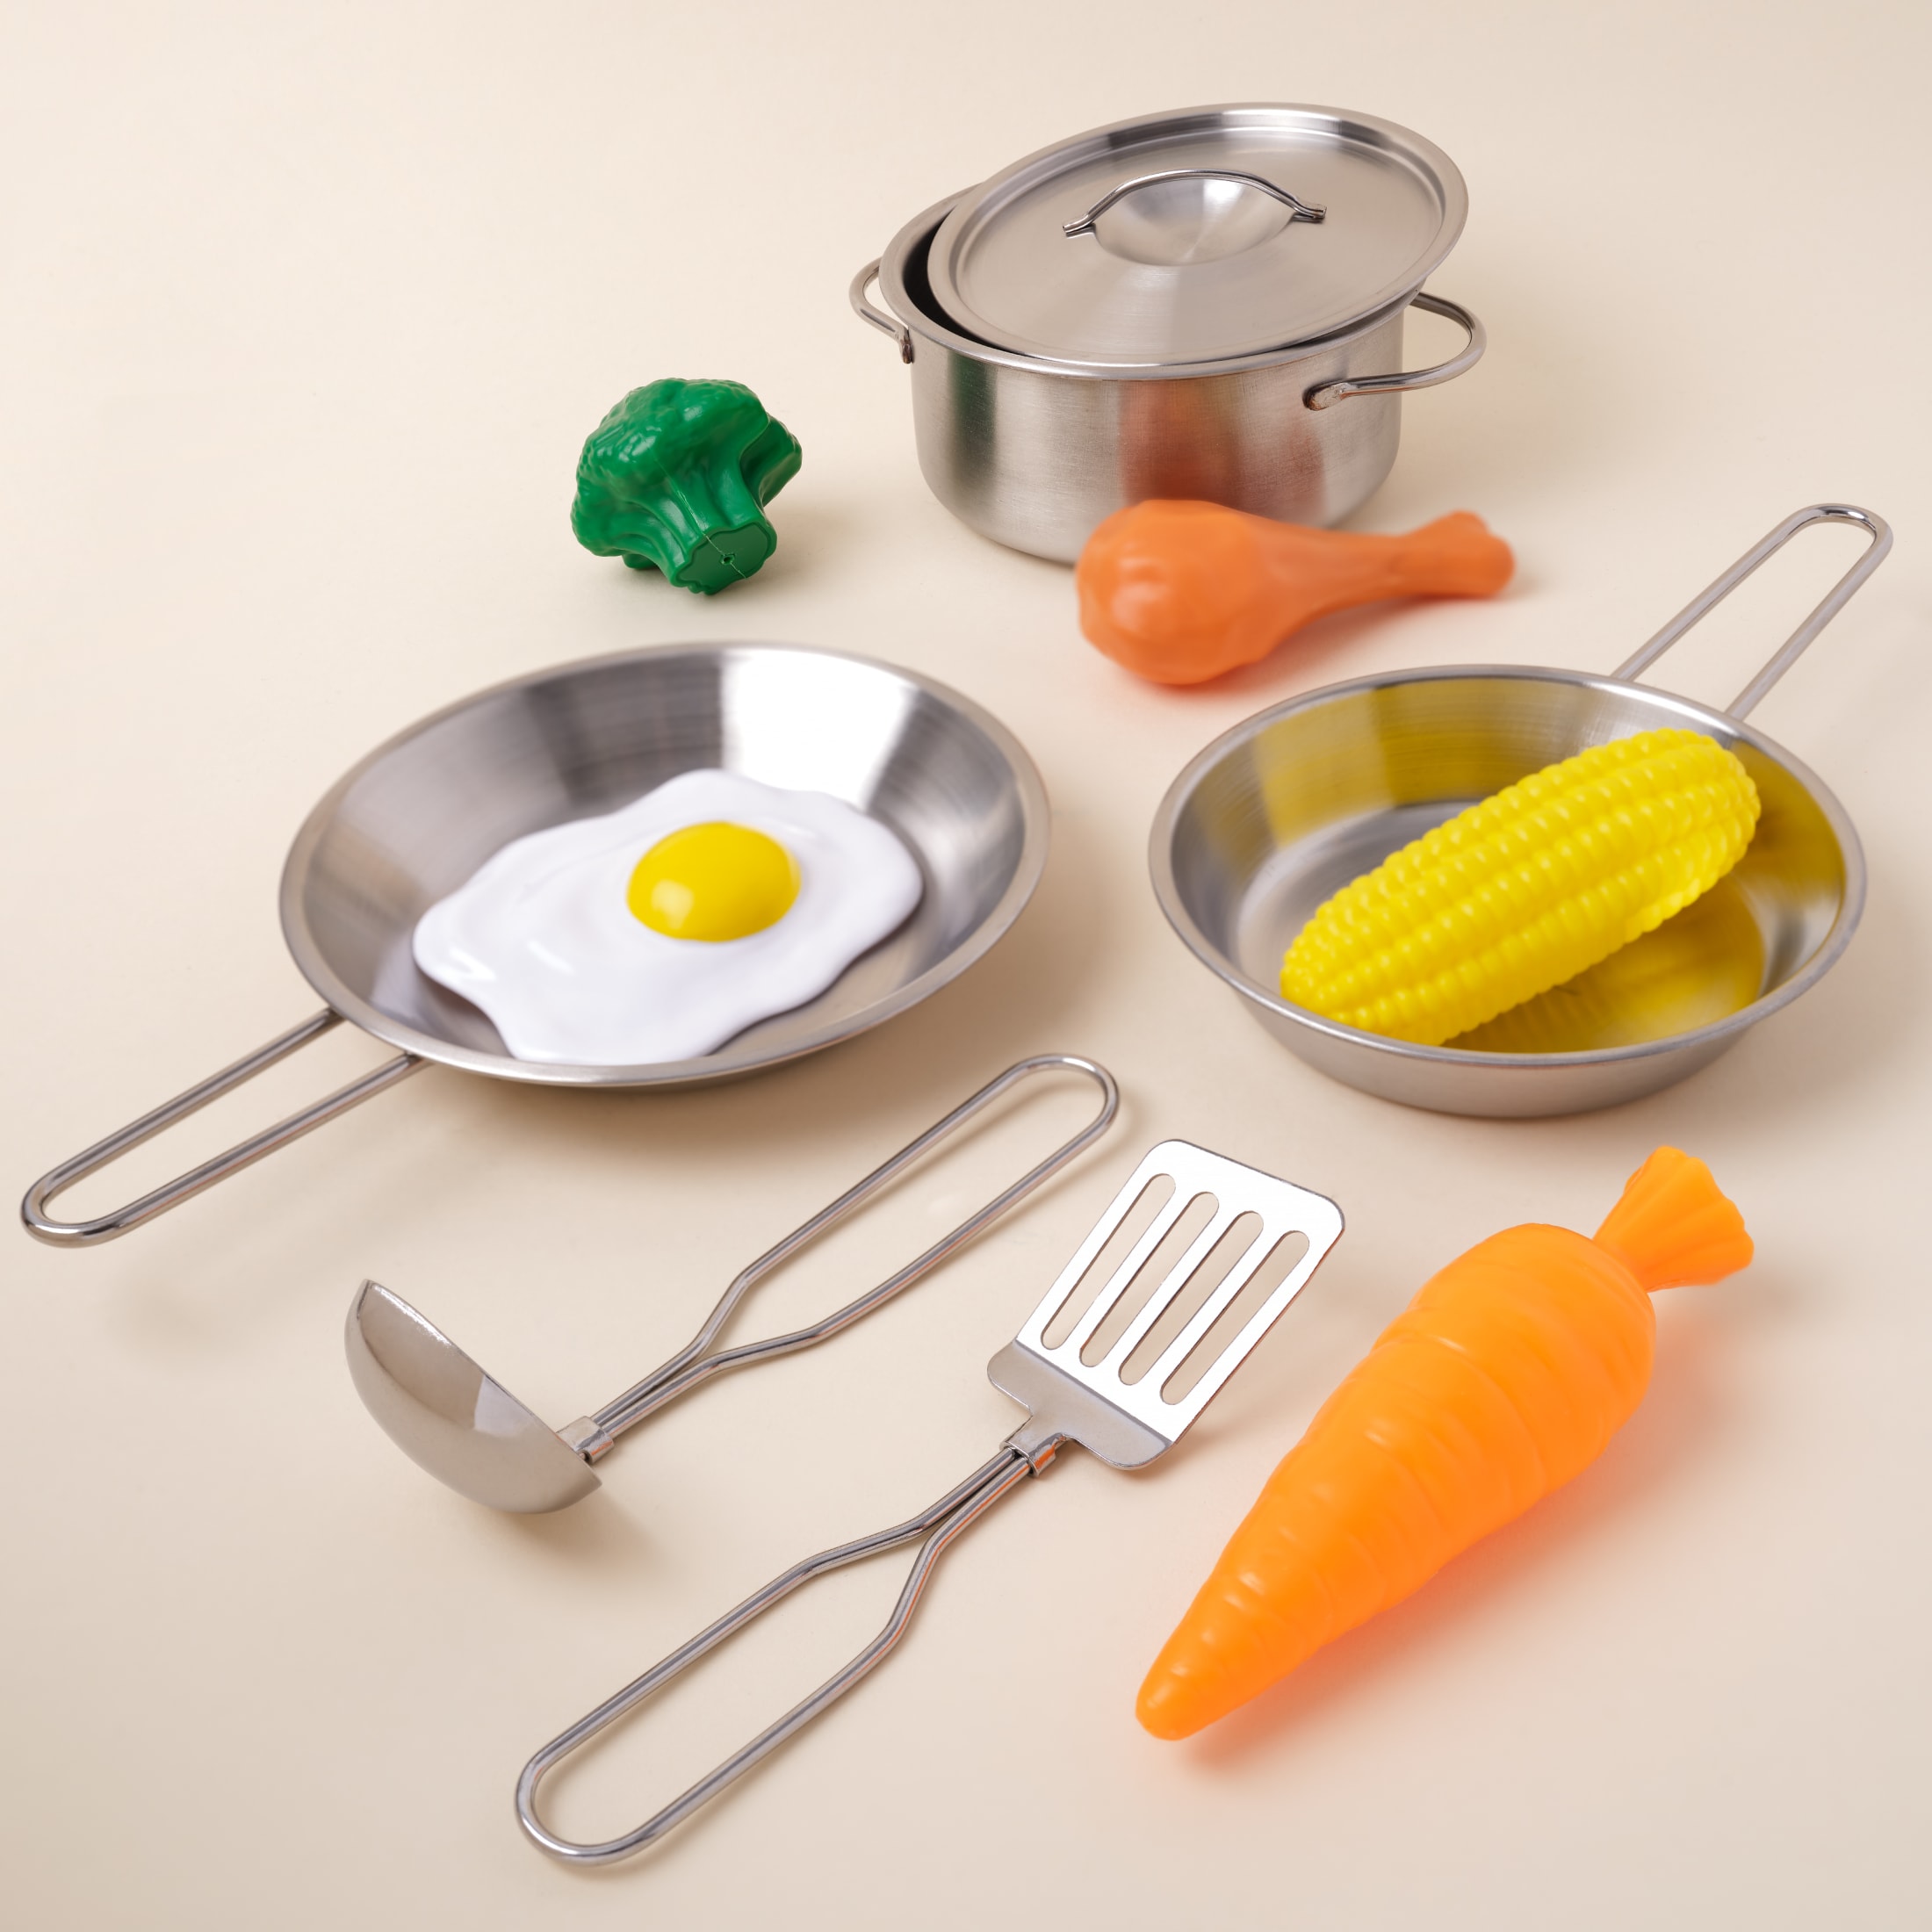 KidKraft Deluxe Cookware Metal Play Set with 11 Pieces of Play Food - image 3 of 5